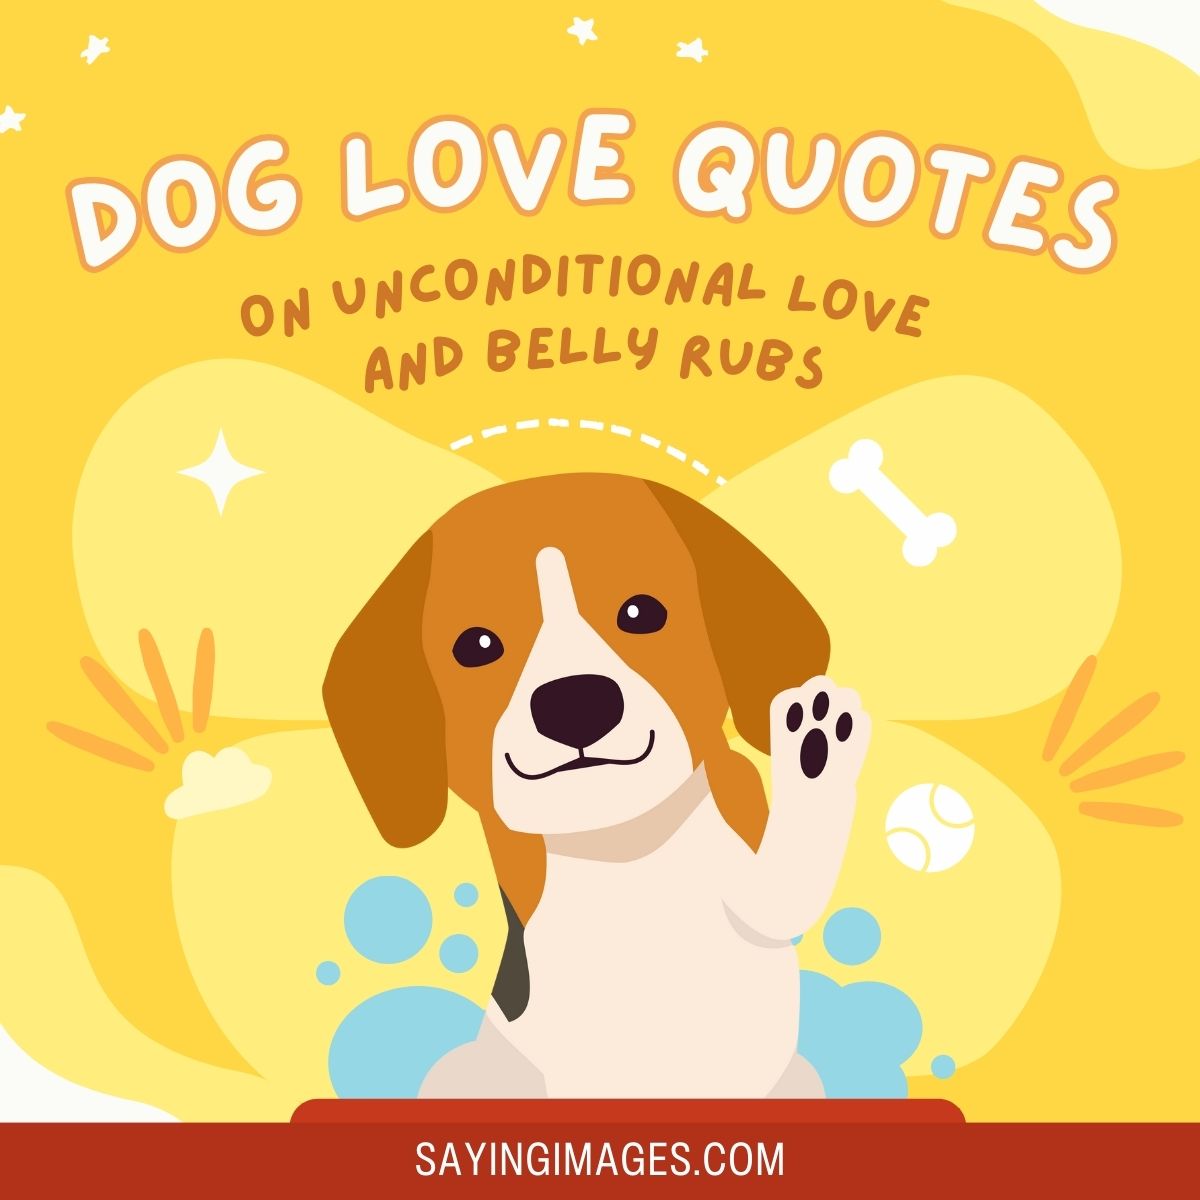 Dog Love Quotes on Unconditional Love and Belly Rubs